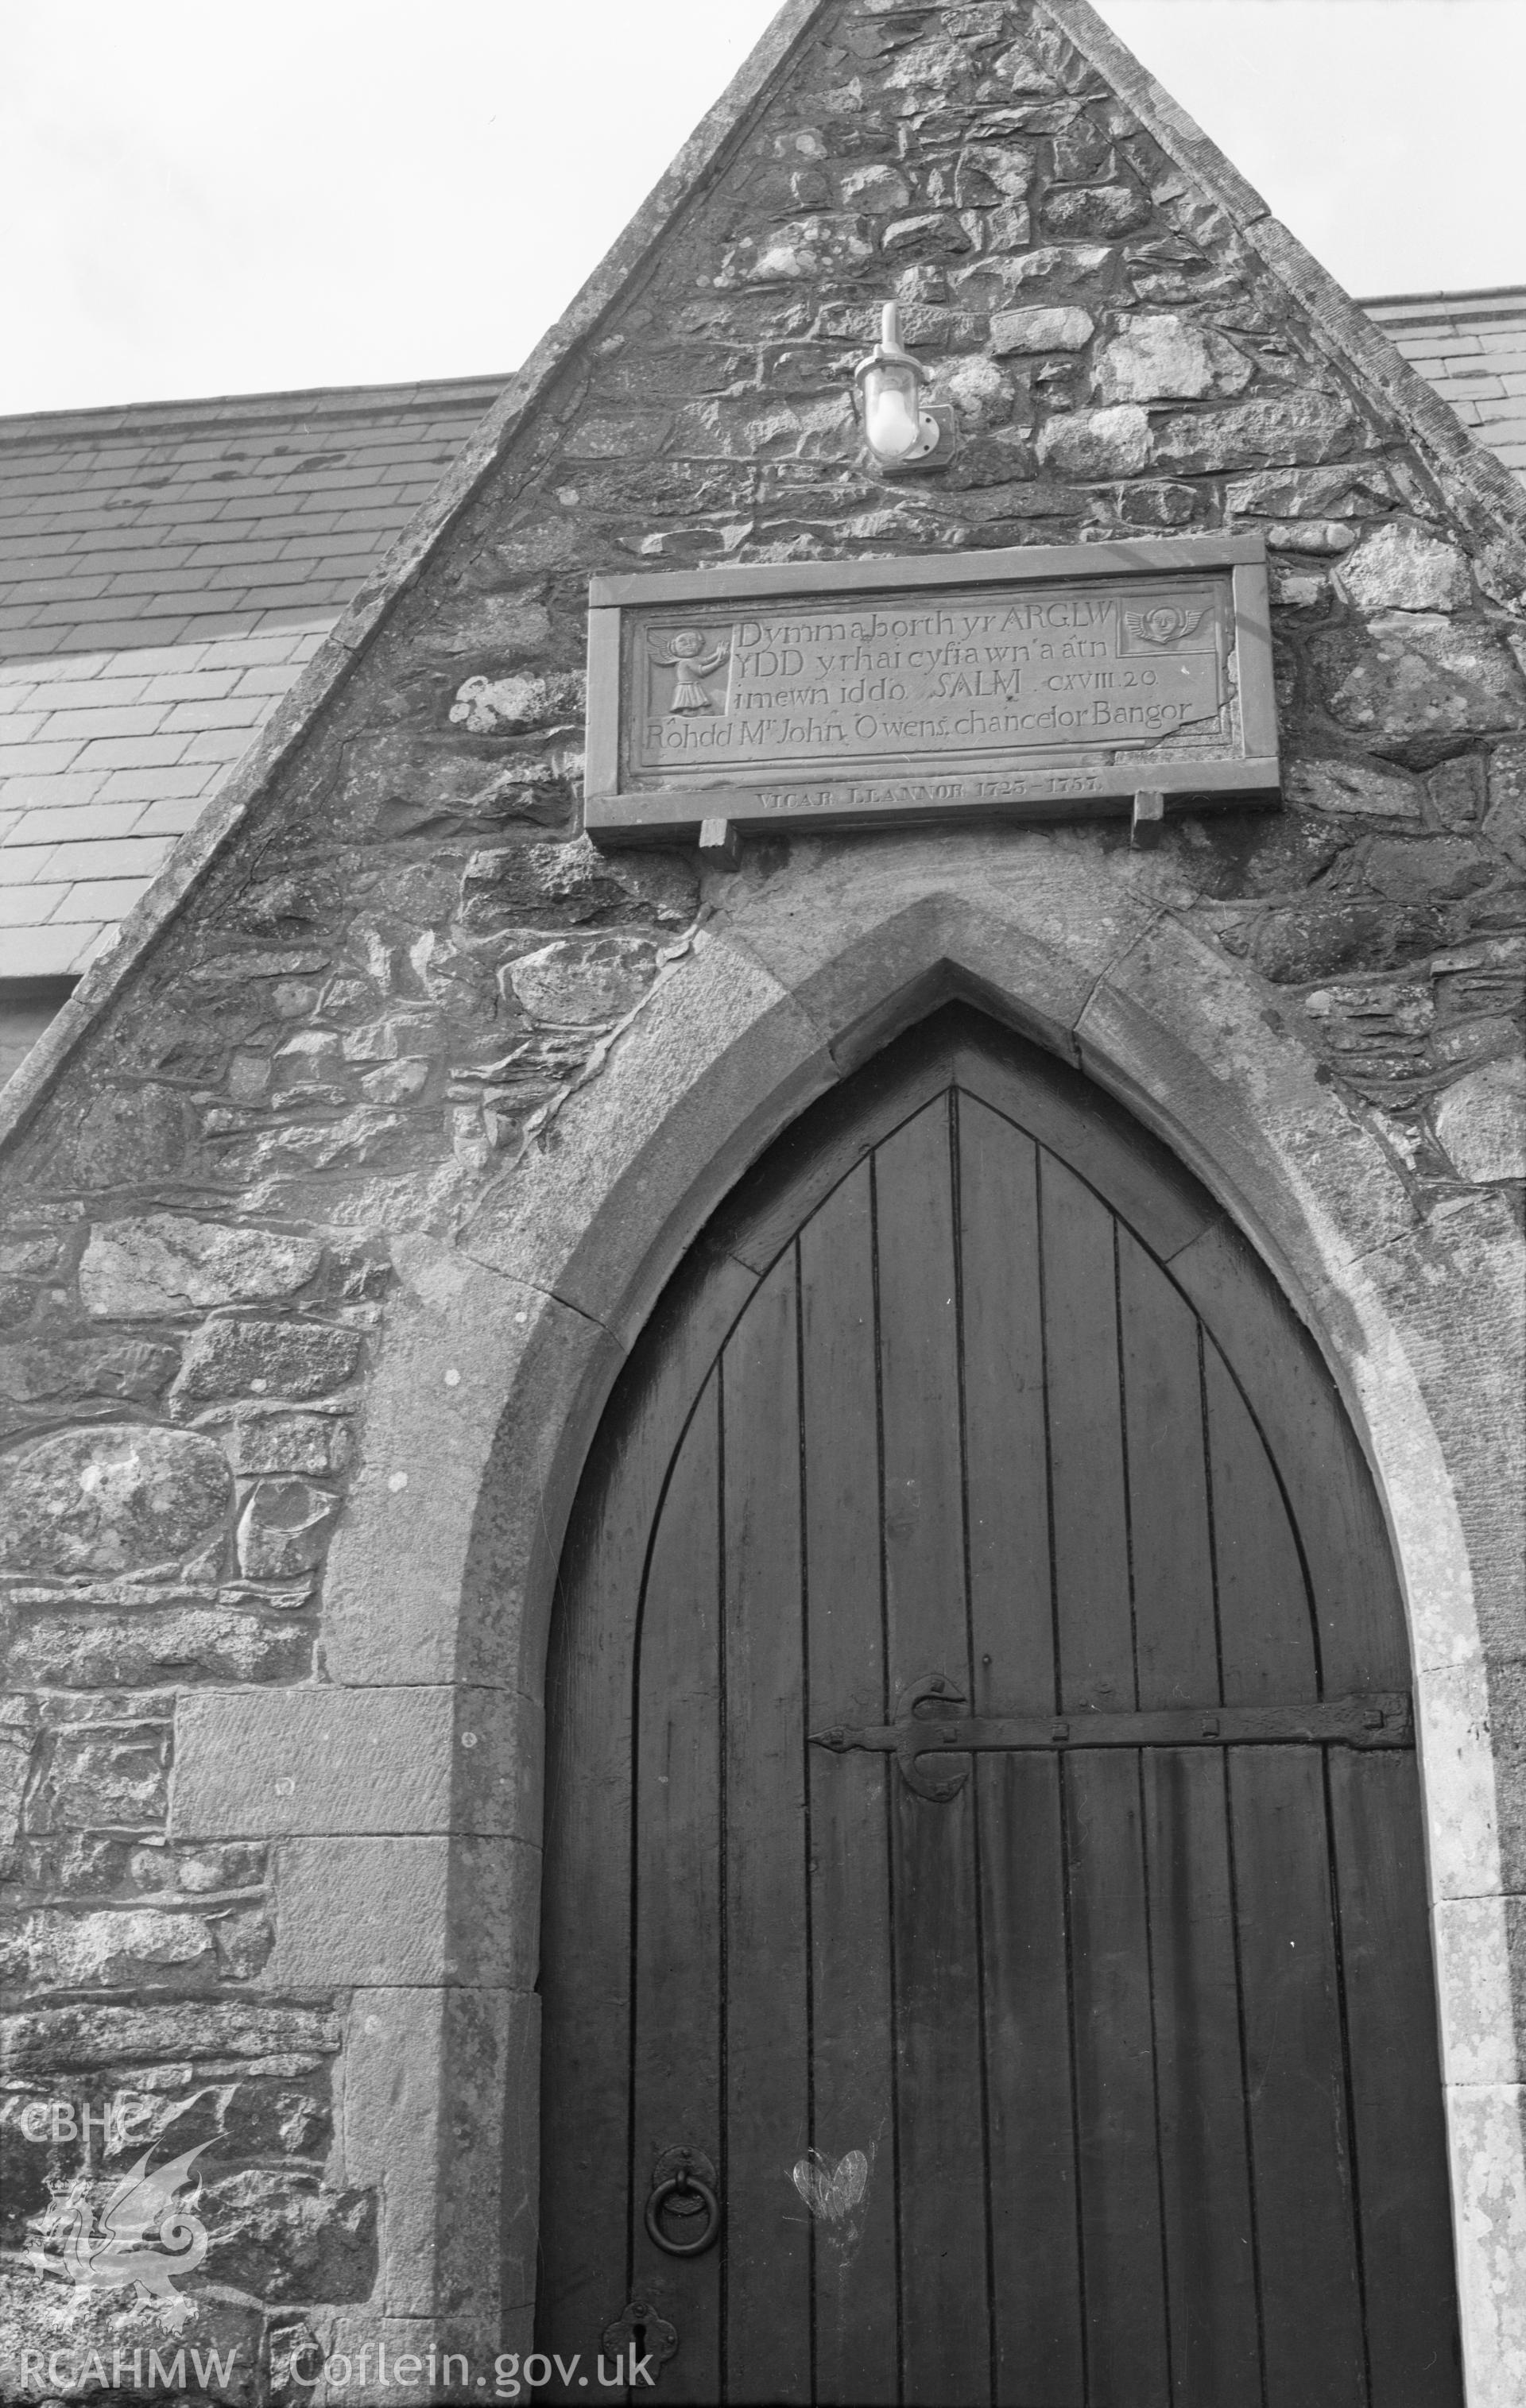 Black and white nitrate negative showing exterior view of Llannor Church.